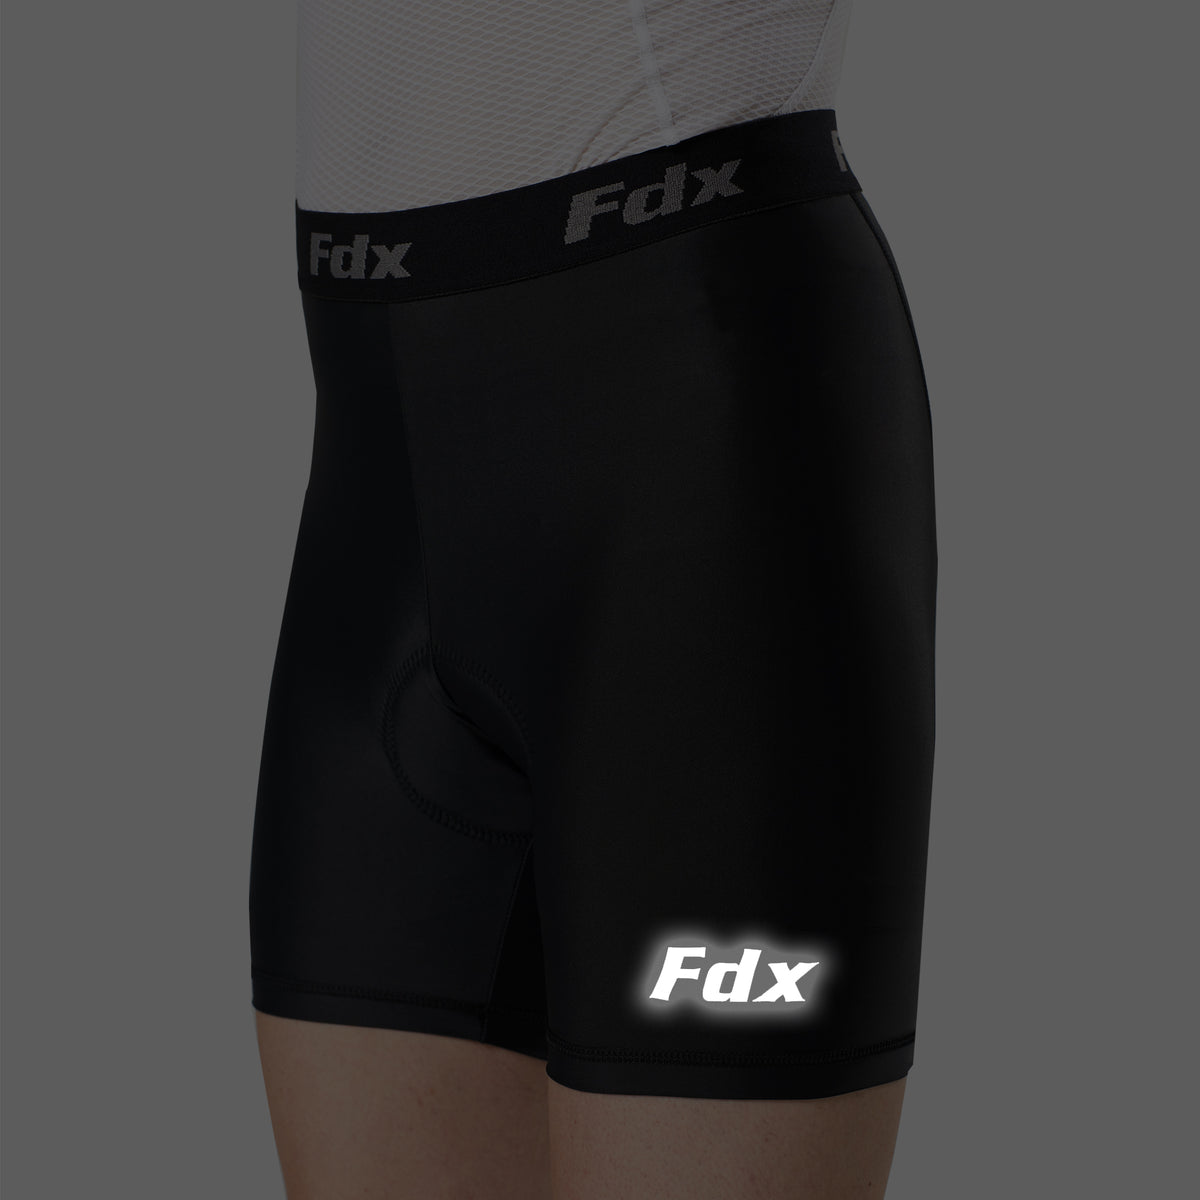 Fdx Essential Men's Padded Summer Cycling Shorts with Pockets Grey